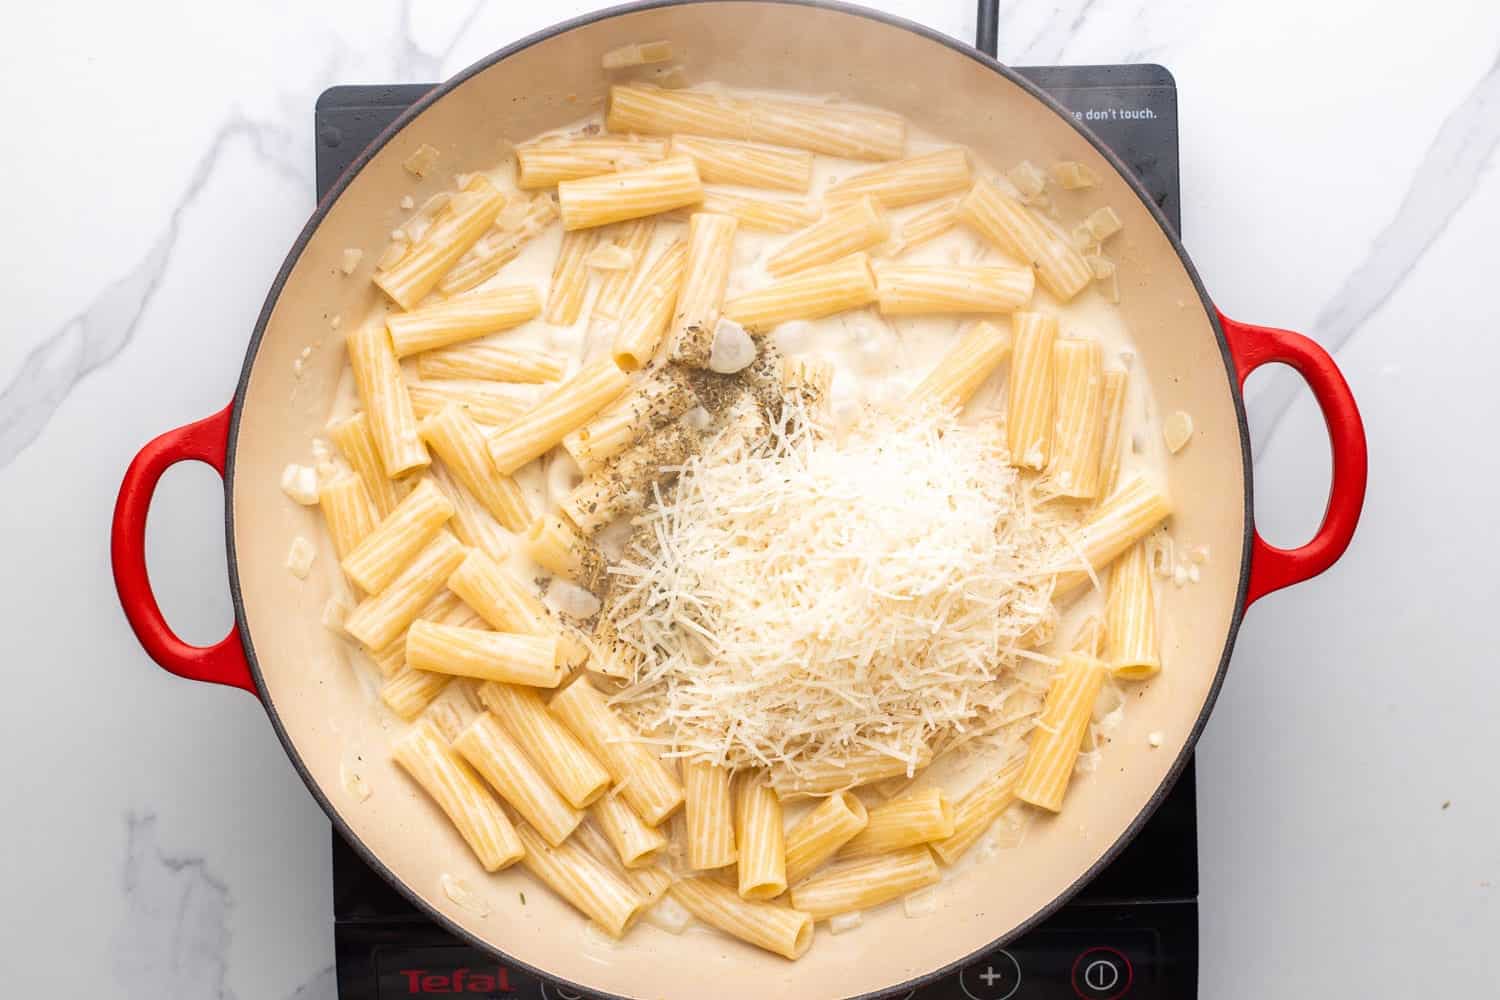 parmesan cheese, salt, and pepper added to creamy parmesan pasta in a skillet, viewed from overhead.